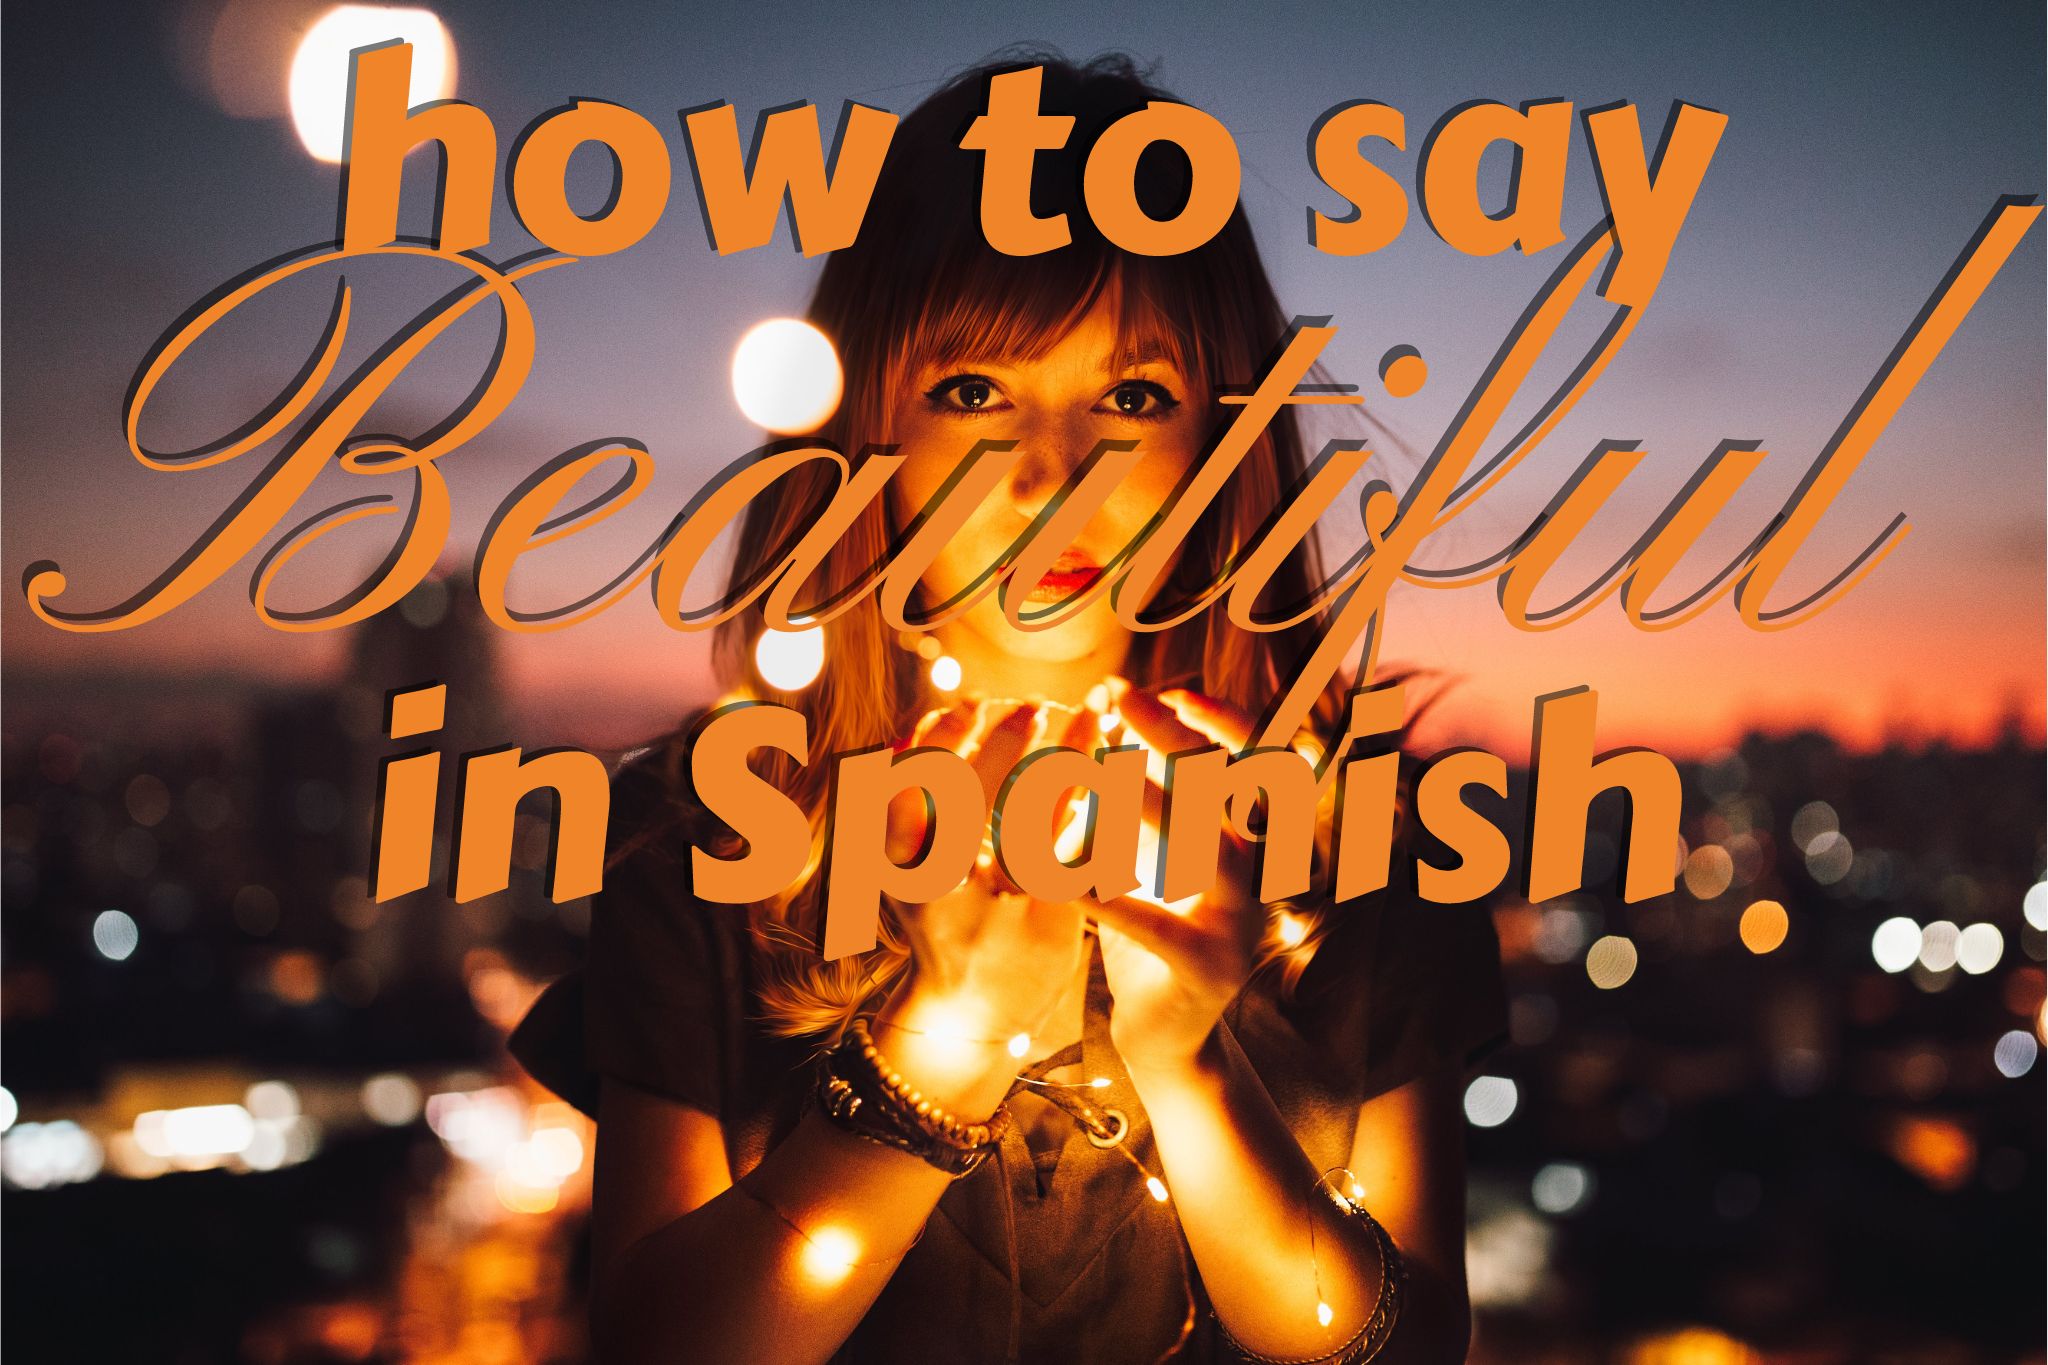 How to say Beautiful in Spanish